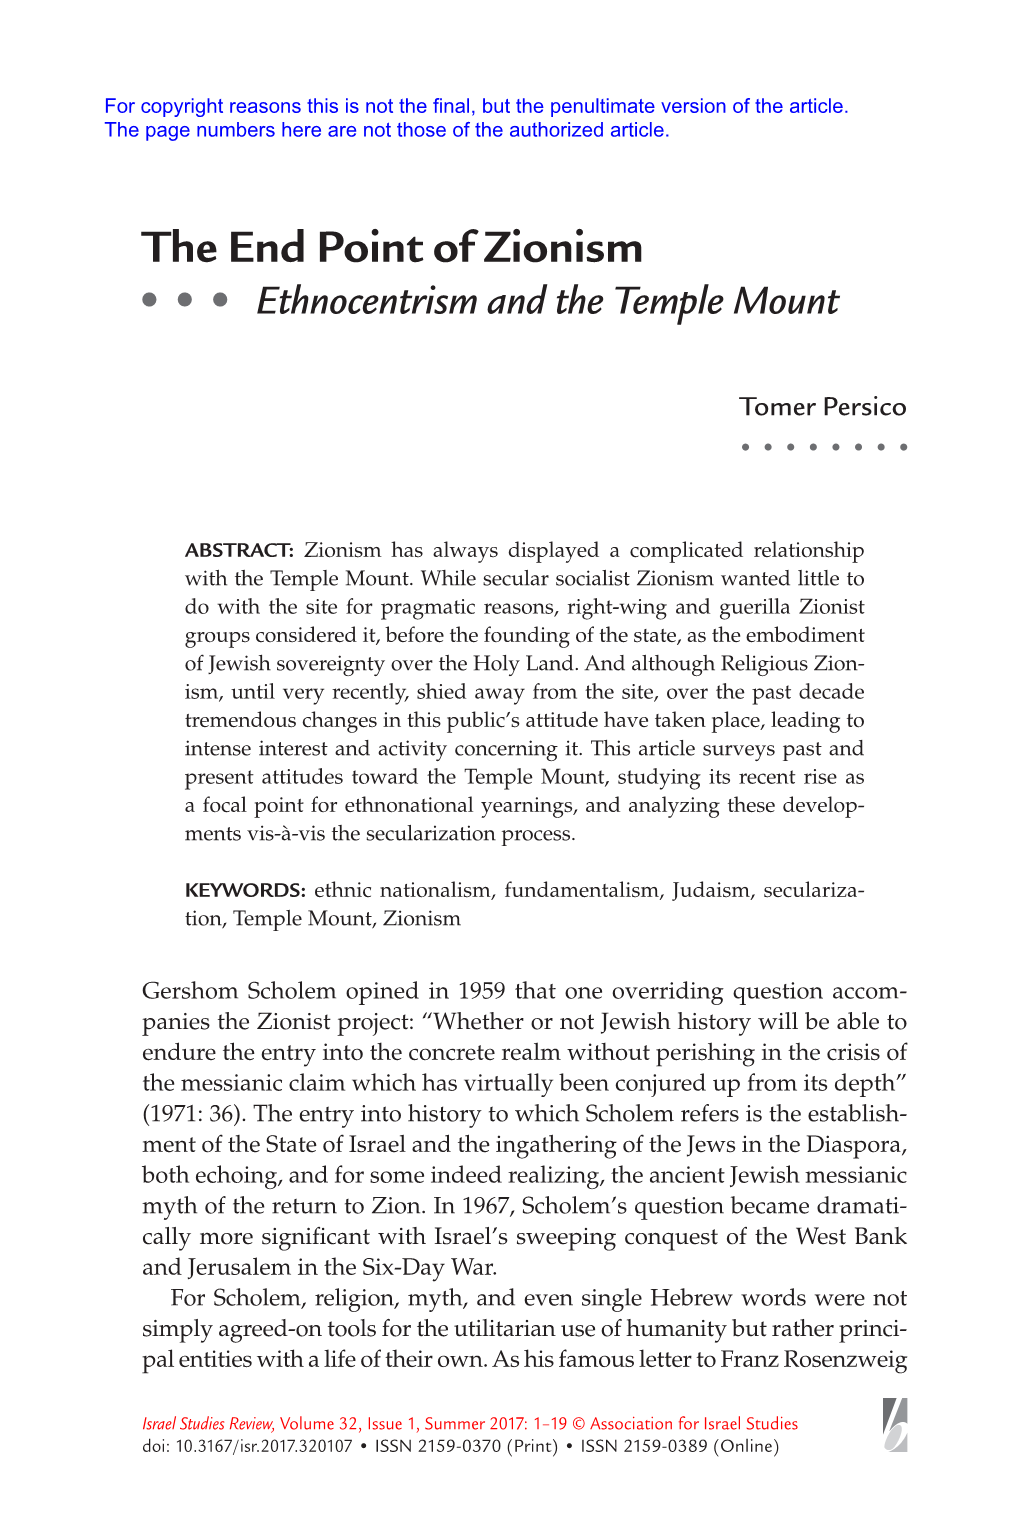 The End Point of Zionism: Ethnocentrism and the Temple Mount